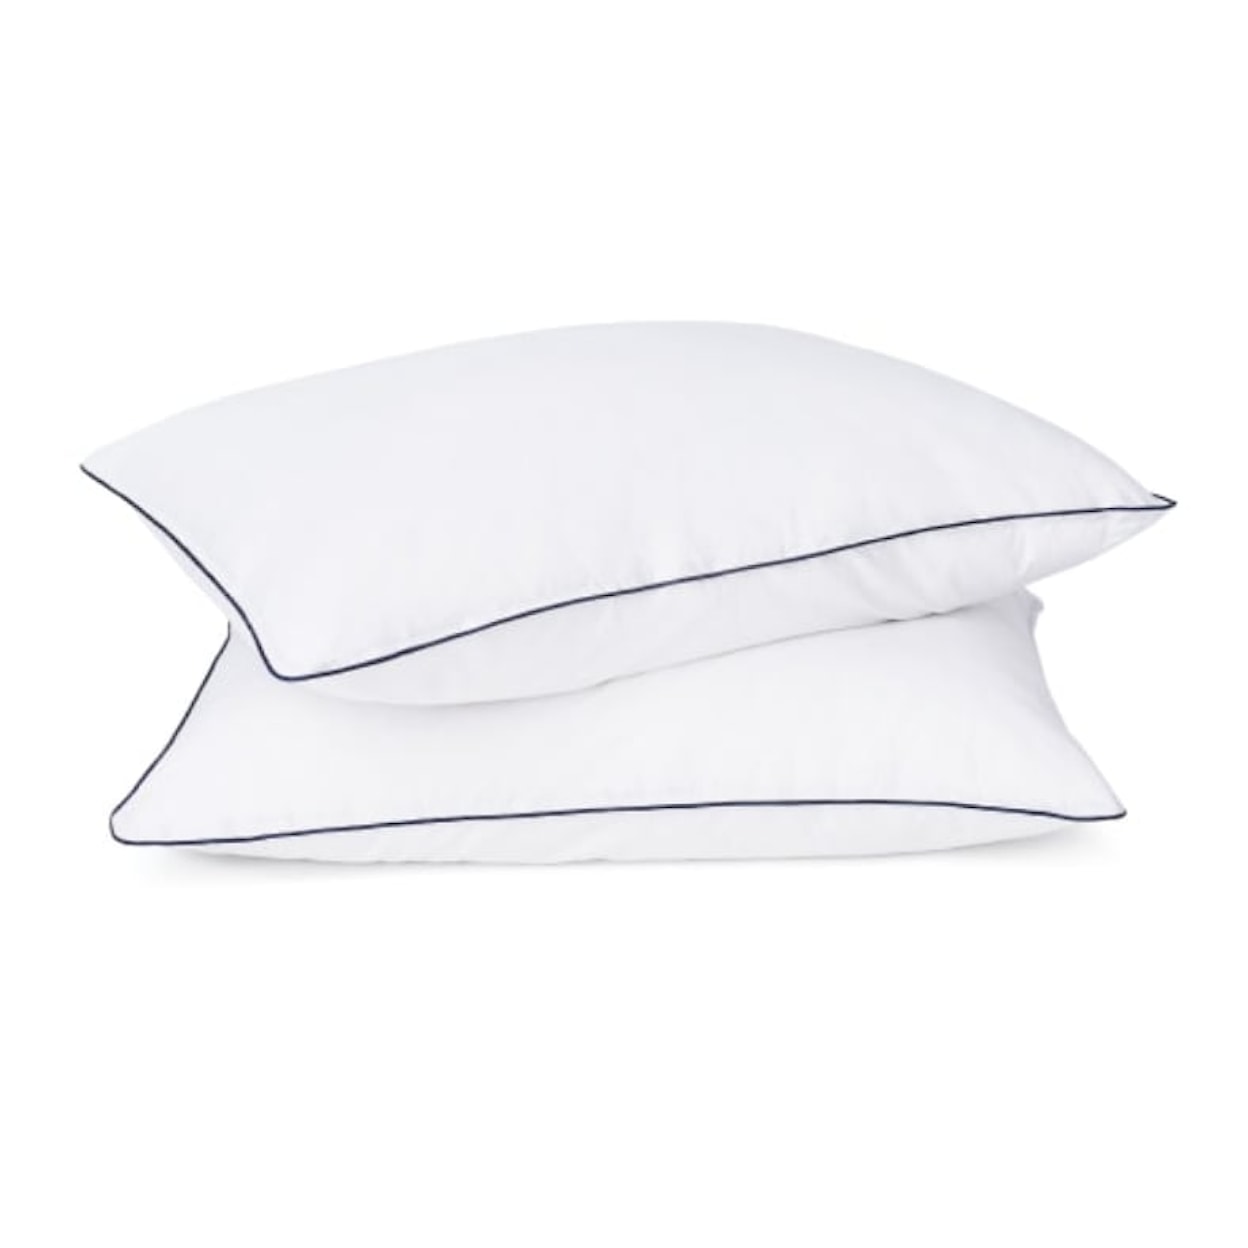 Helix Sunset Luxe Sunset Luxe Twin XL + FREE Pillow